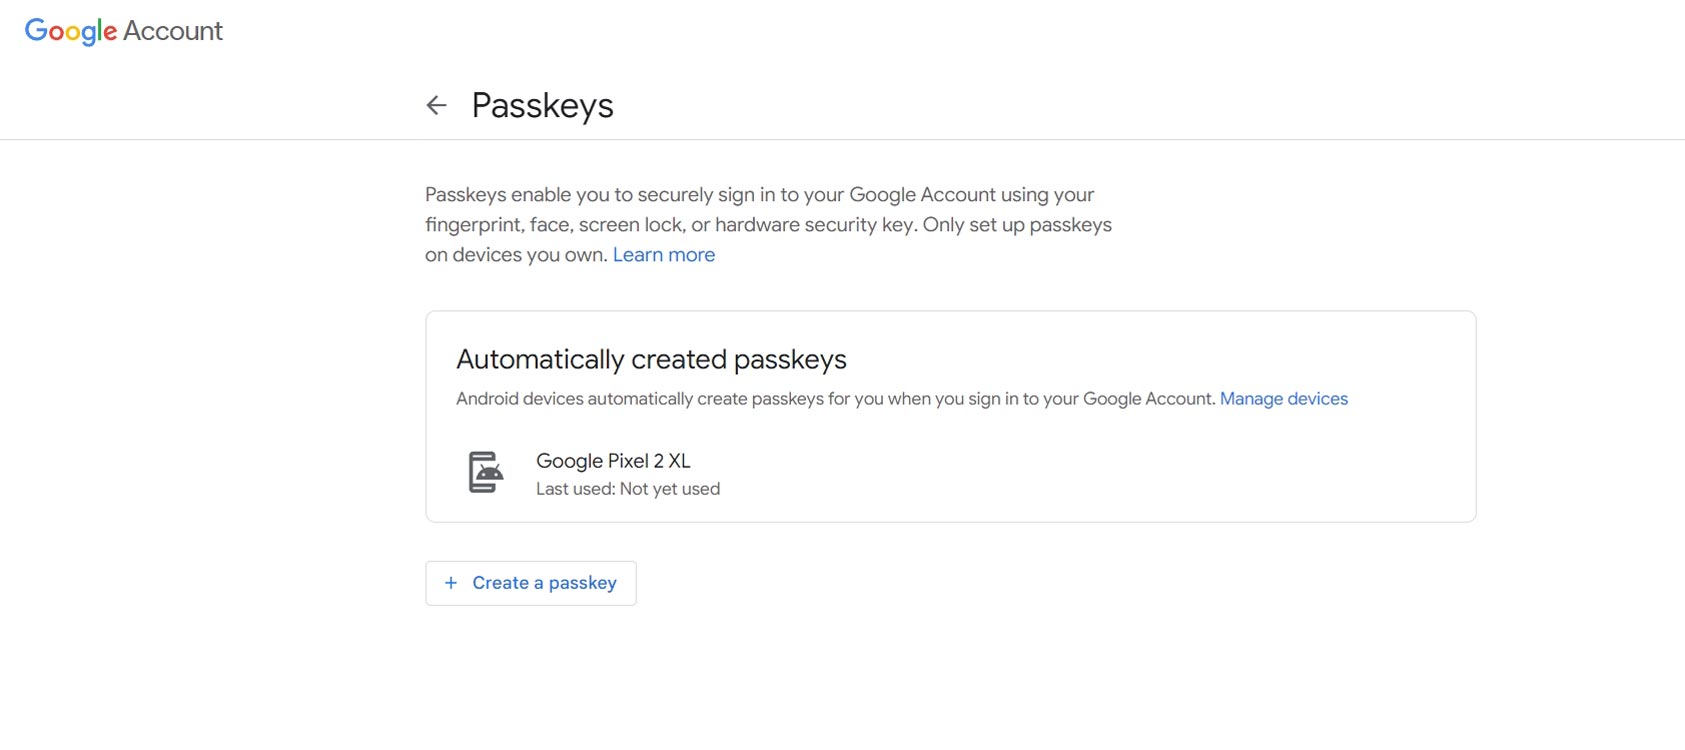 Google Account Passkeys Page